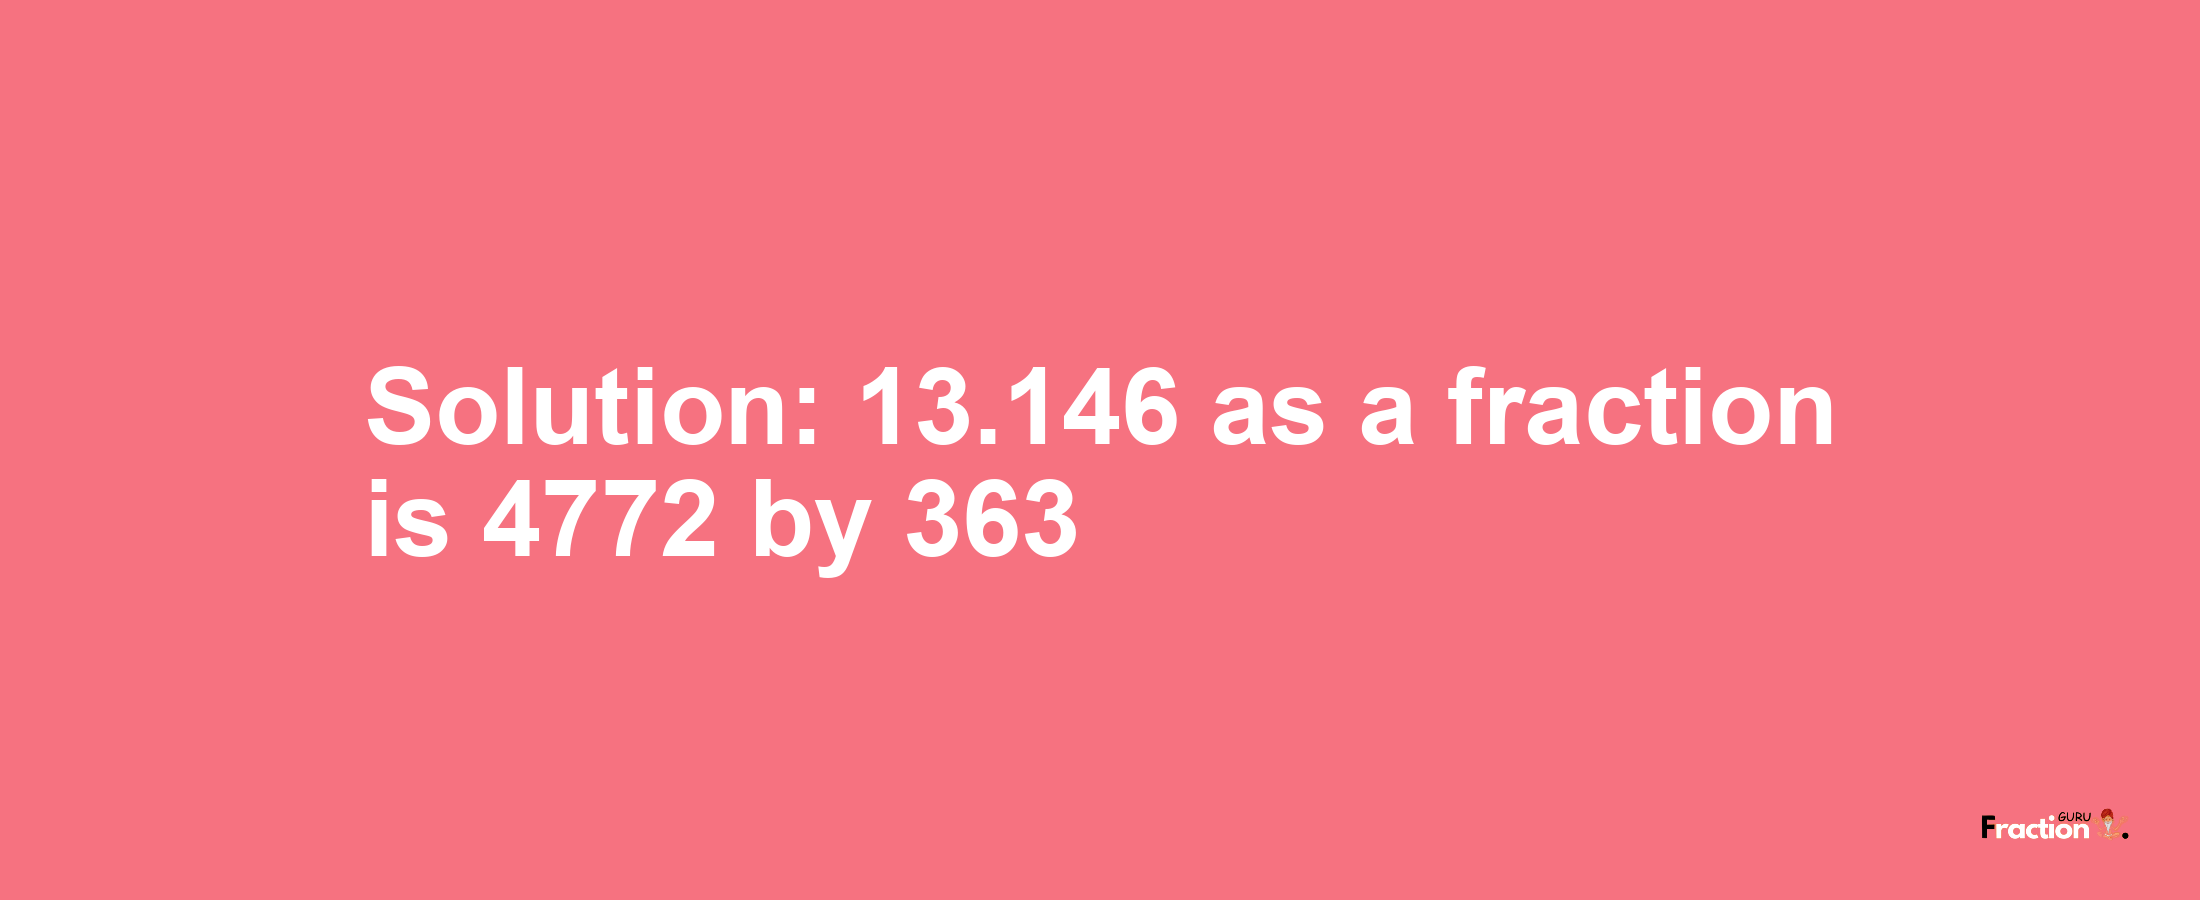 Solution:13.146 as a fraction is 4772/363